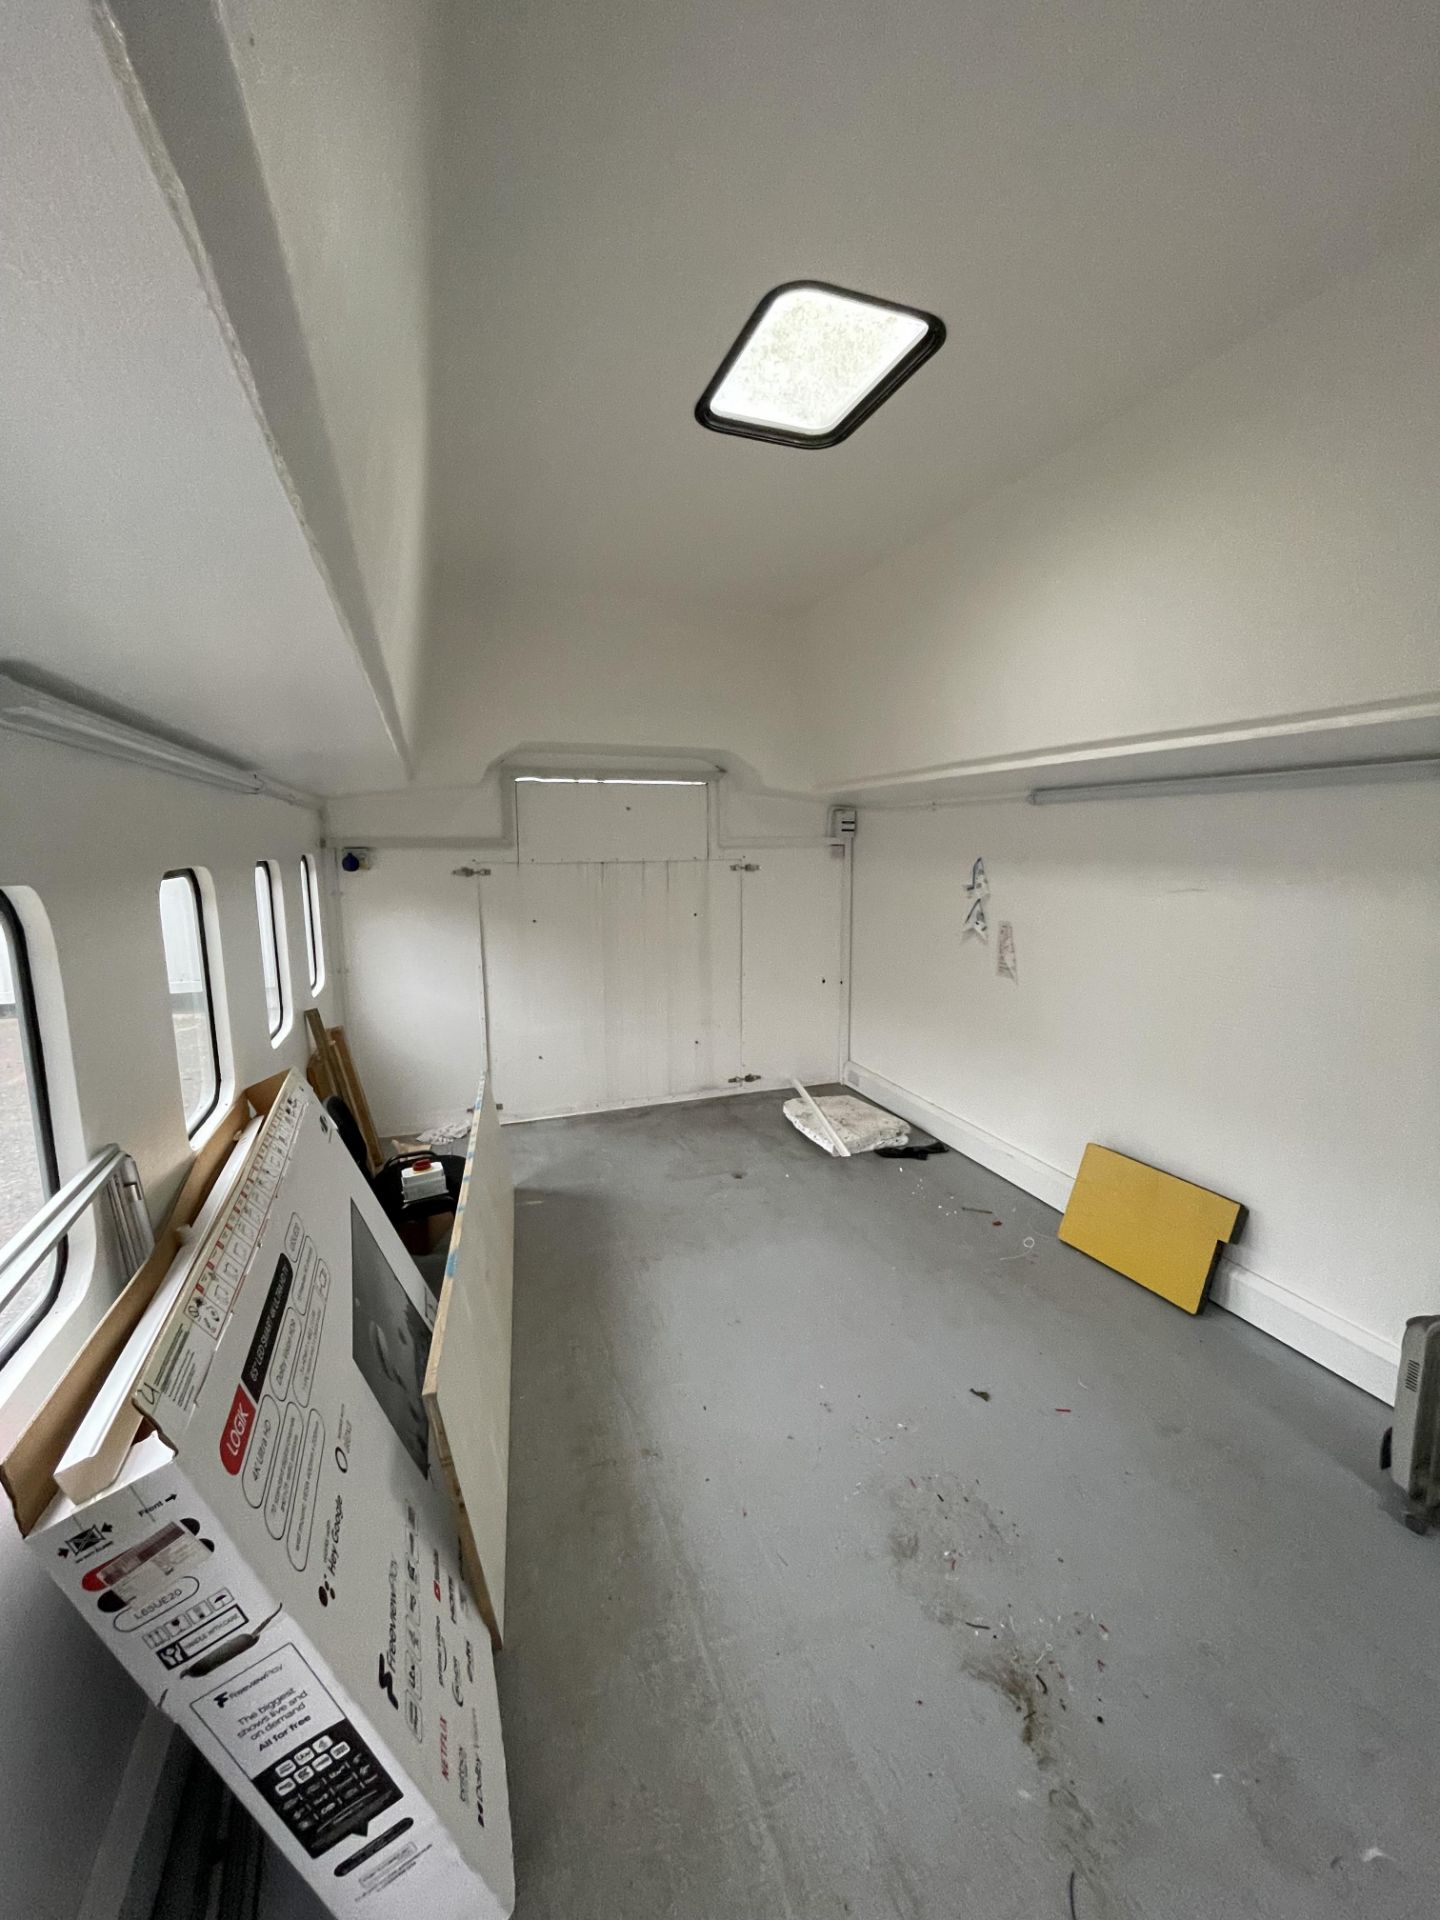 Marine Pod Cabin Office, Internal Measurements: 5.5x3.3x3.1m with 2x Doors and Strip Lighting - Image 3 of 6